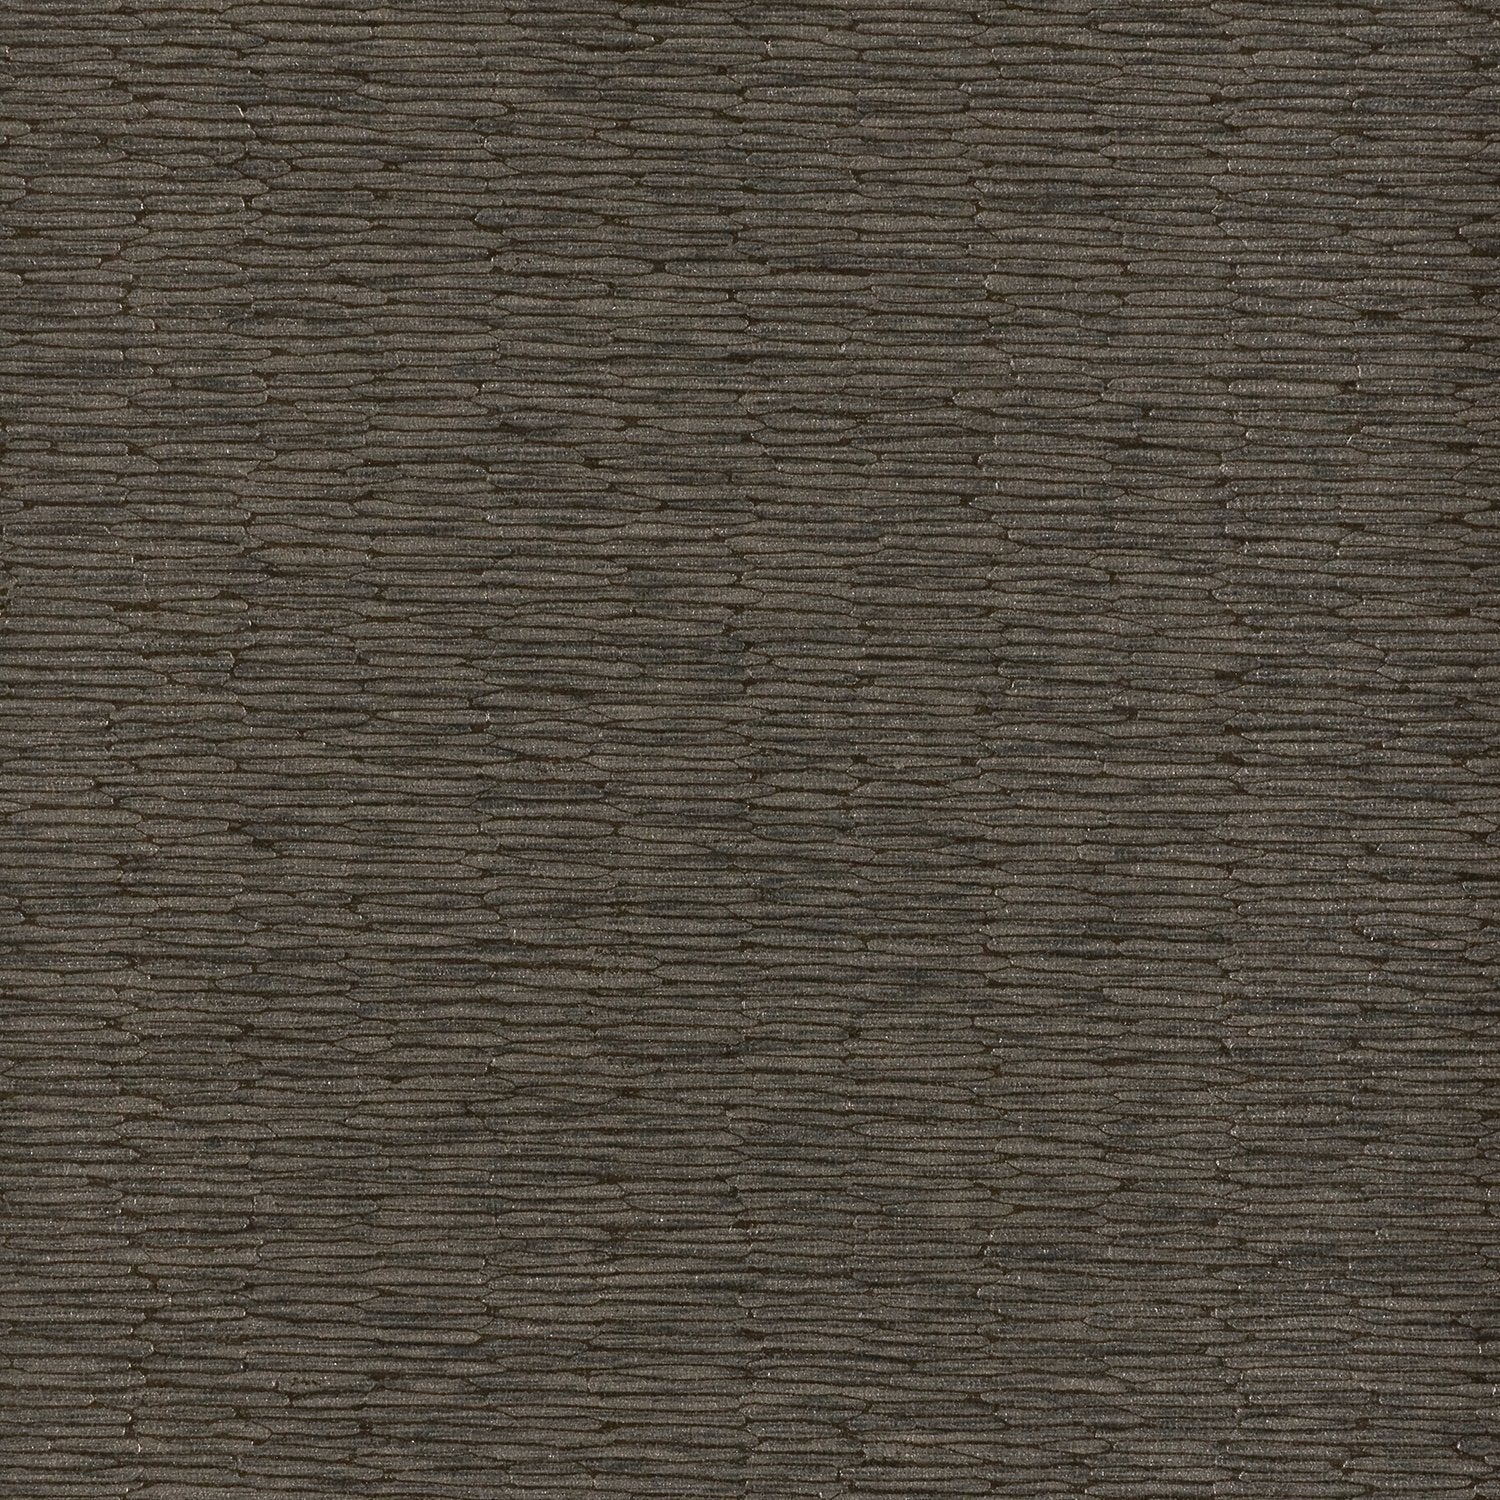 Chipper - Y46869 - Wallcovering - Vycon - Kube Contract